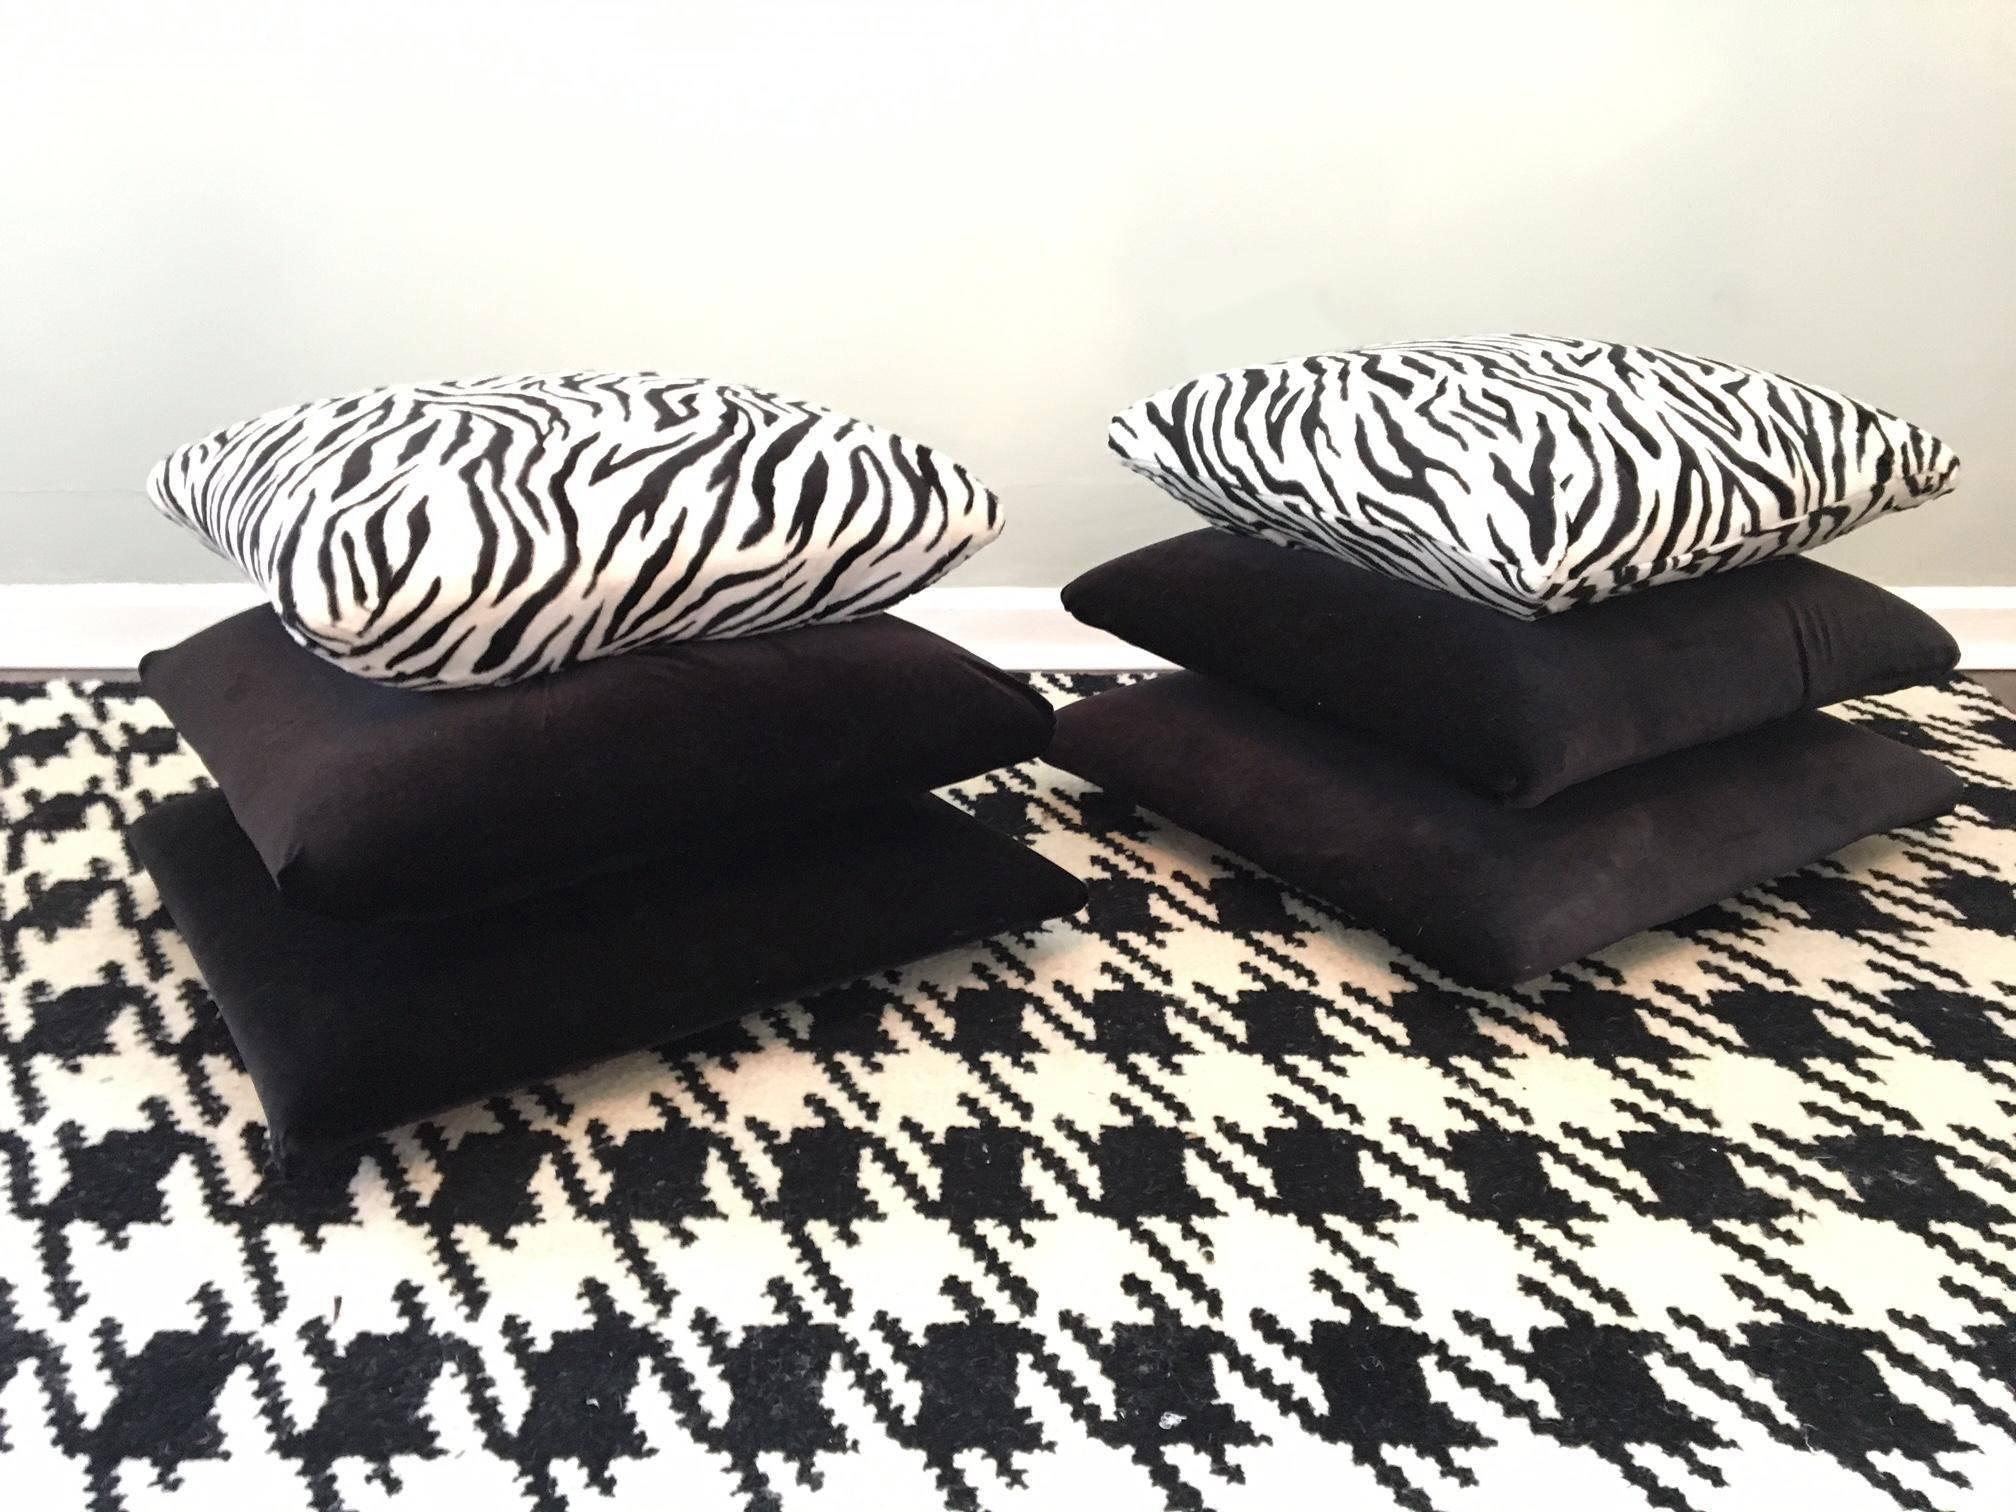 Perfect for your Hollywood Regency décor, this pair of footstools features a design that mimics stacked pillows in black with a zebra print pillow on top. Very heavy and sturdy, they are made of a solid wood frame upholstered in soft velvet with